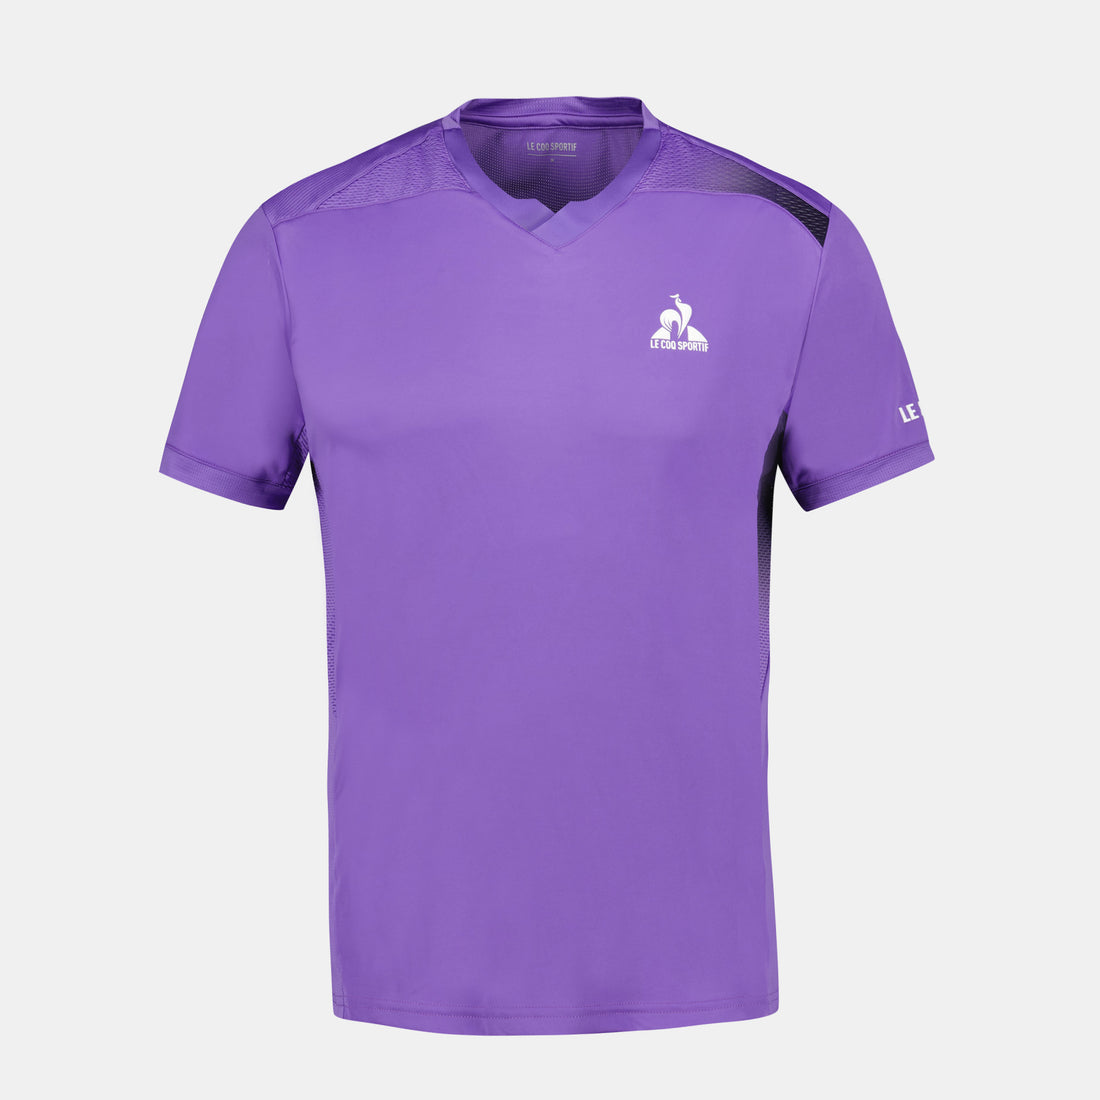 2410515-TENNIS PRO Tee SS 24 N°1 M chive blossom  | Camiseta Performance Hombre